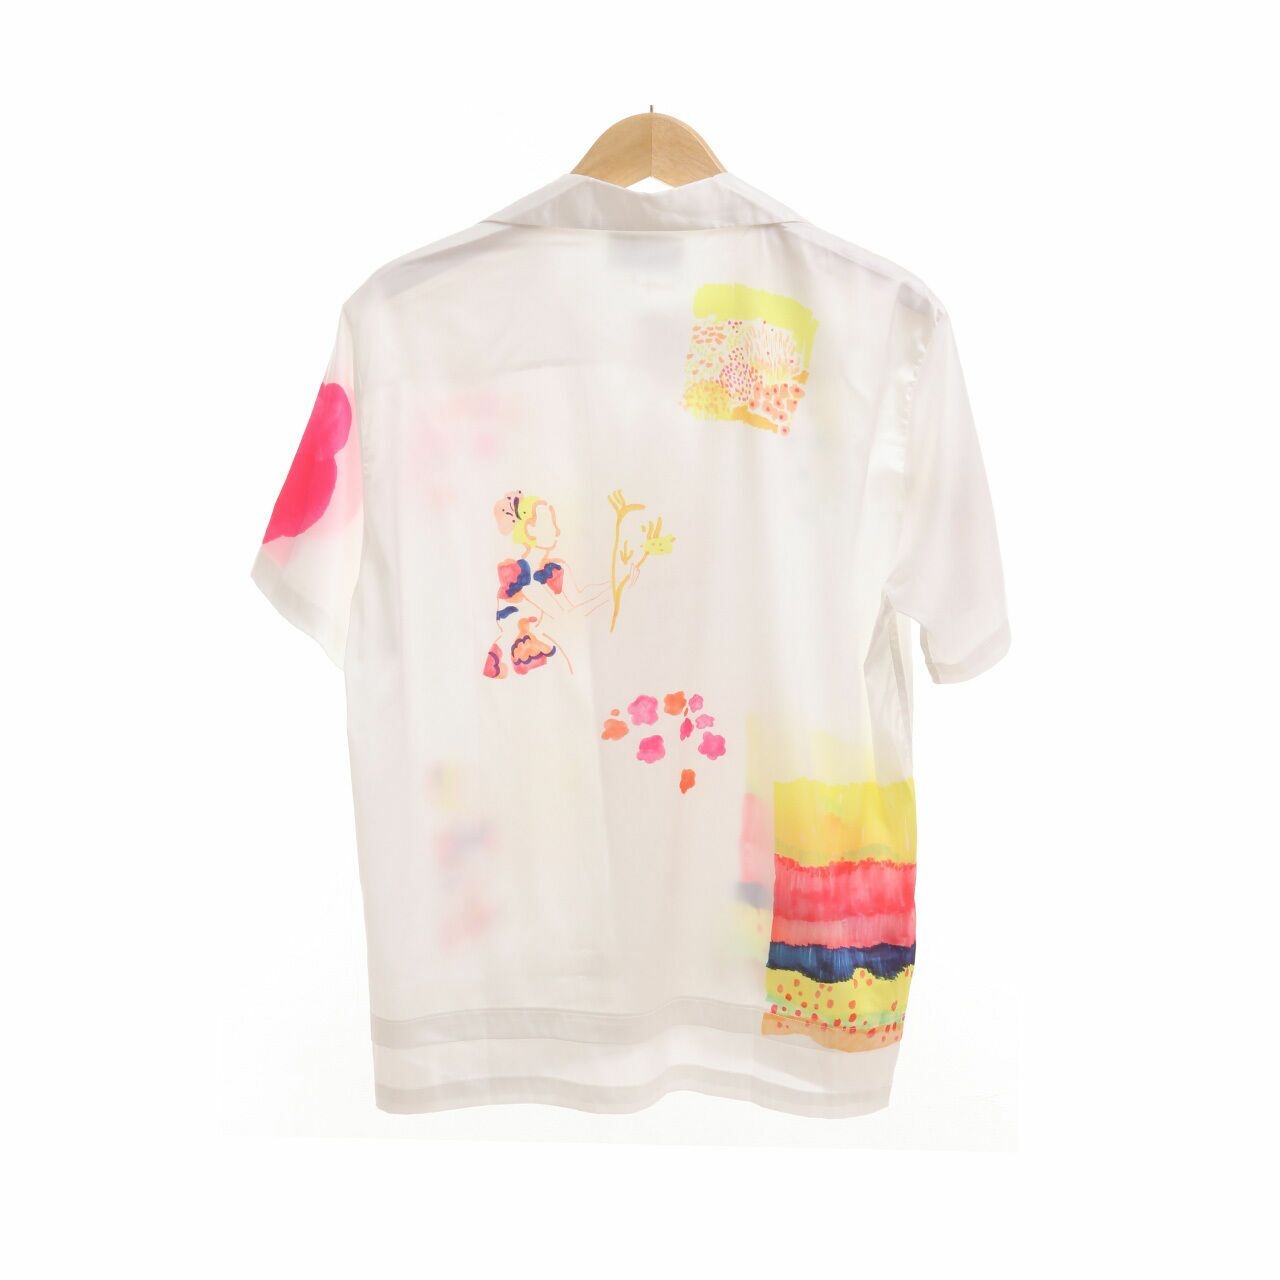 The Good Things In Life Off White Multi Printed Shirt